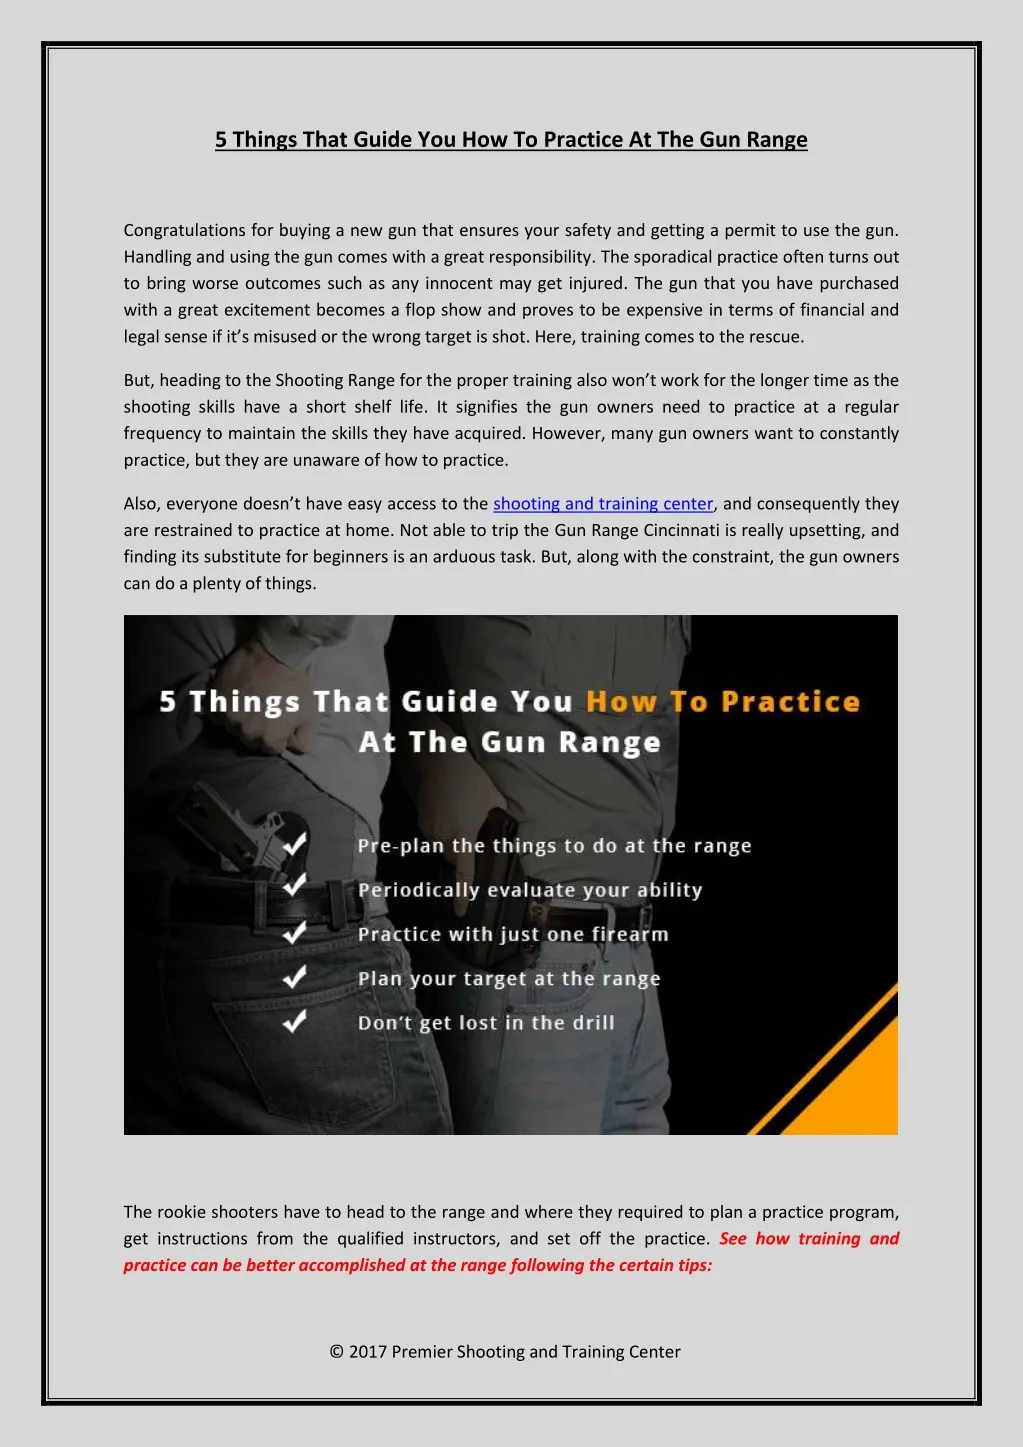 5 things that guide you how to practice